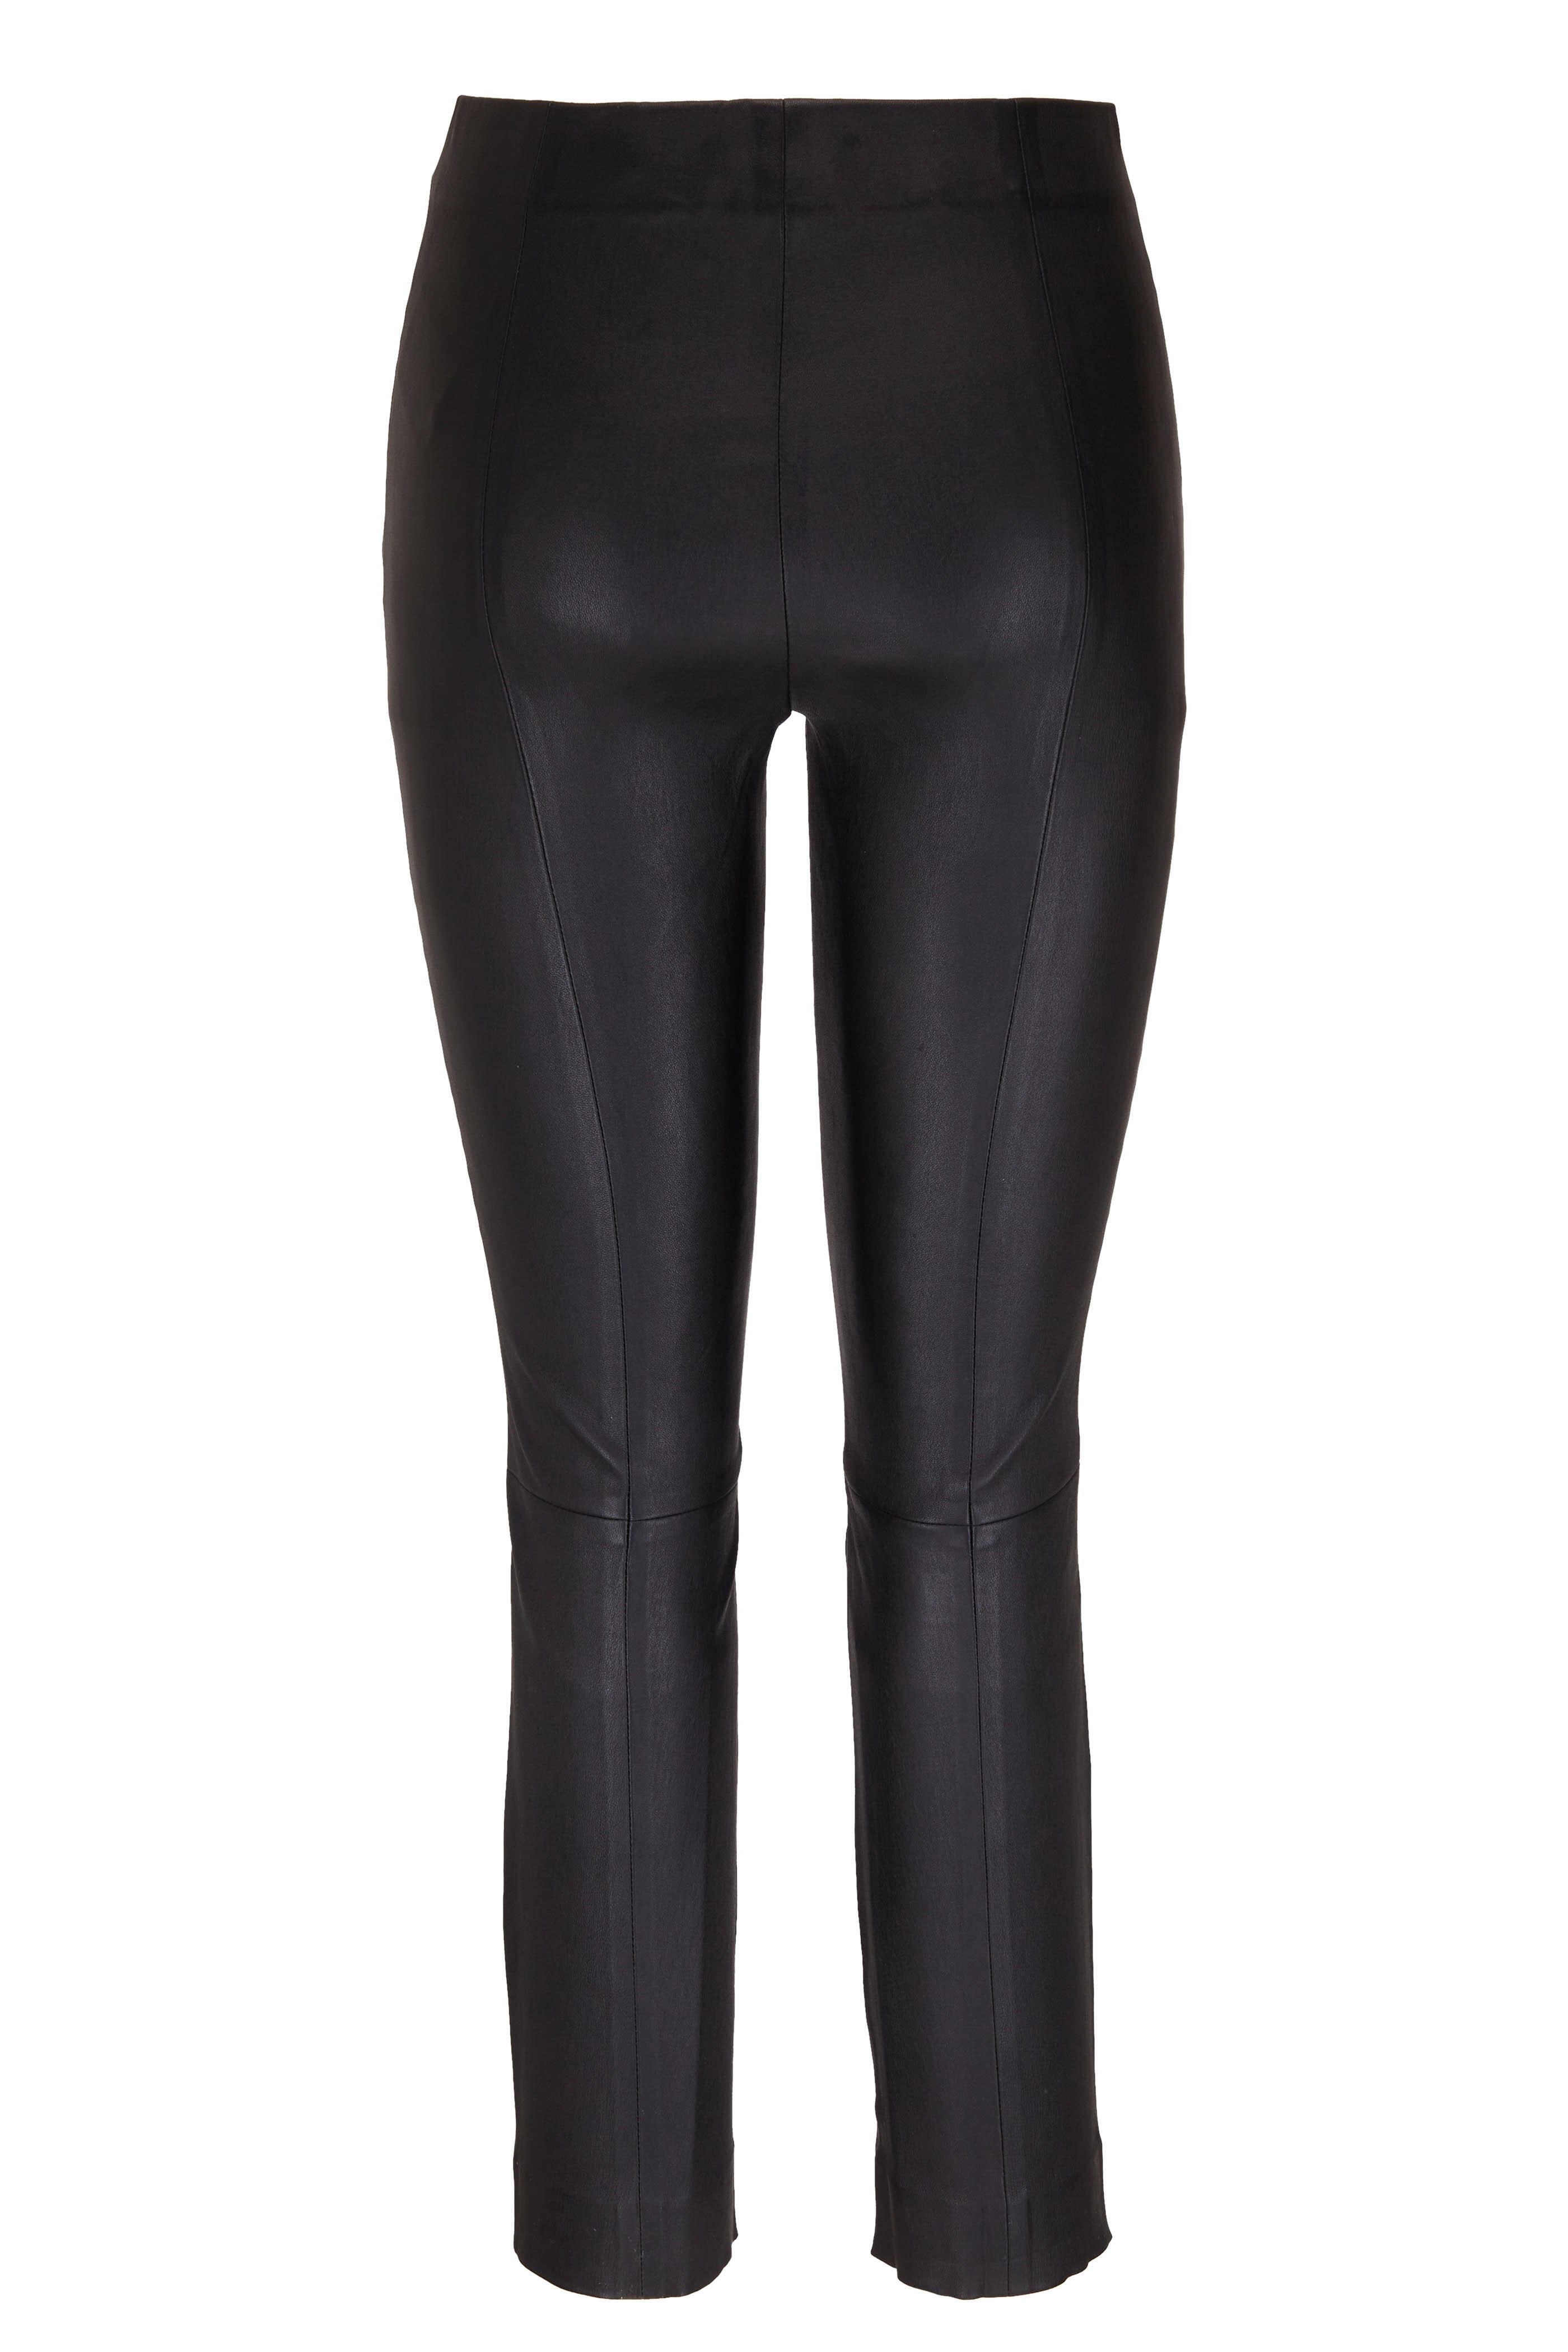 Vince - Black Leather Legging | Mitchell Stores